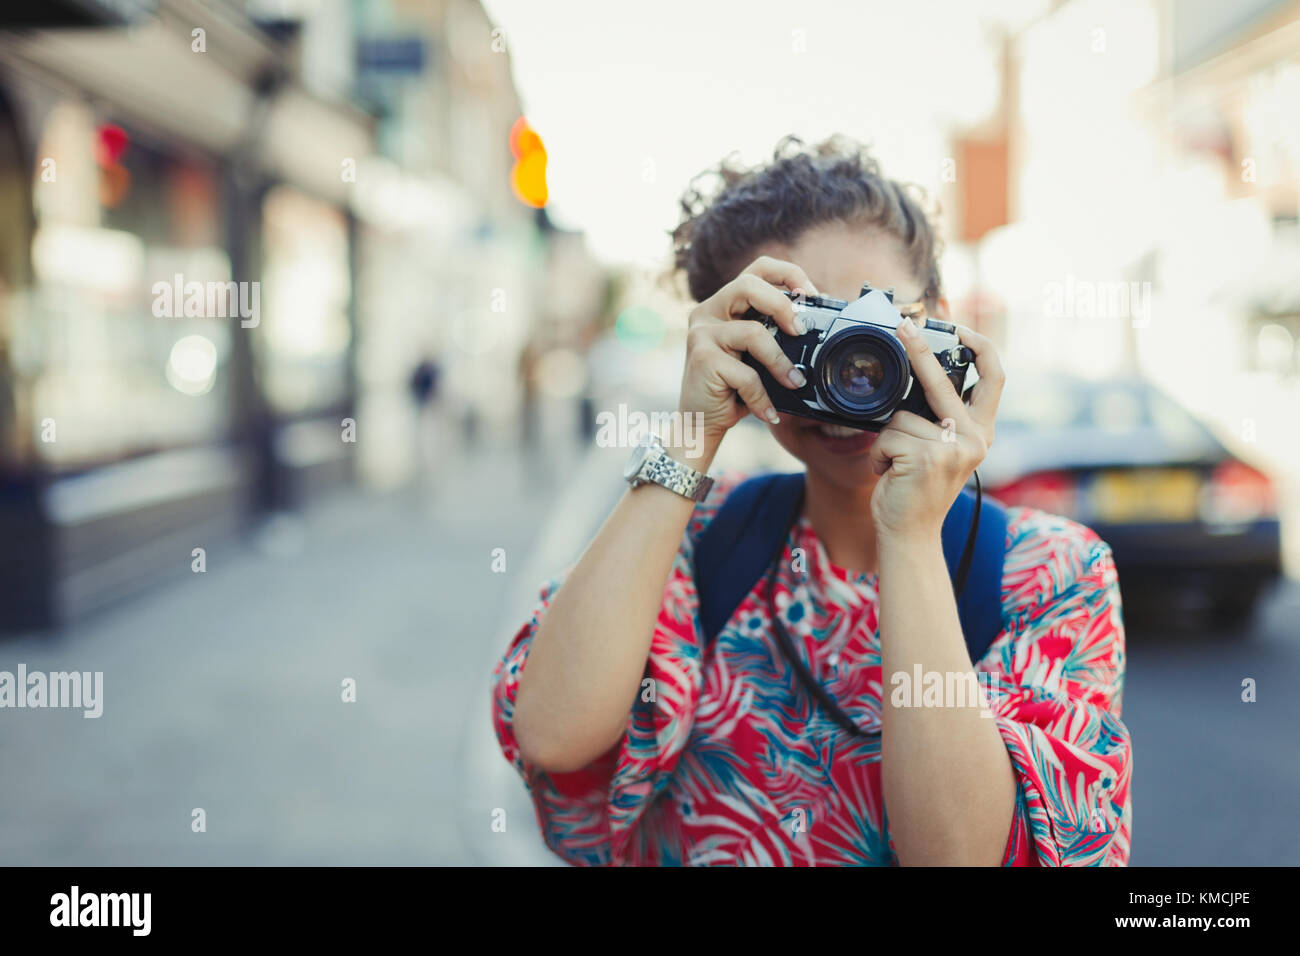 Portrait young woman photographing with camera on street Stock Photo